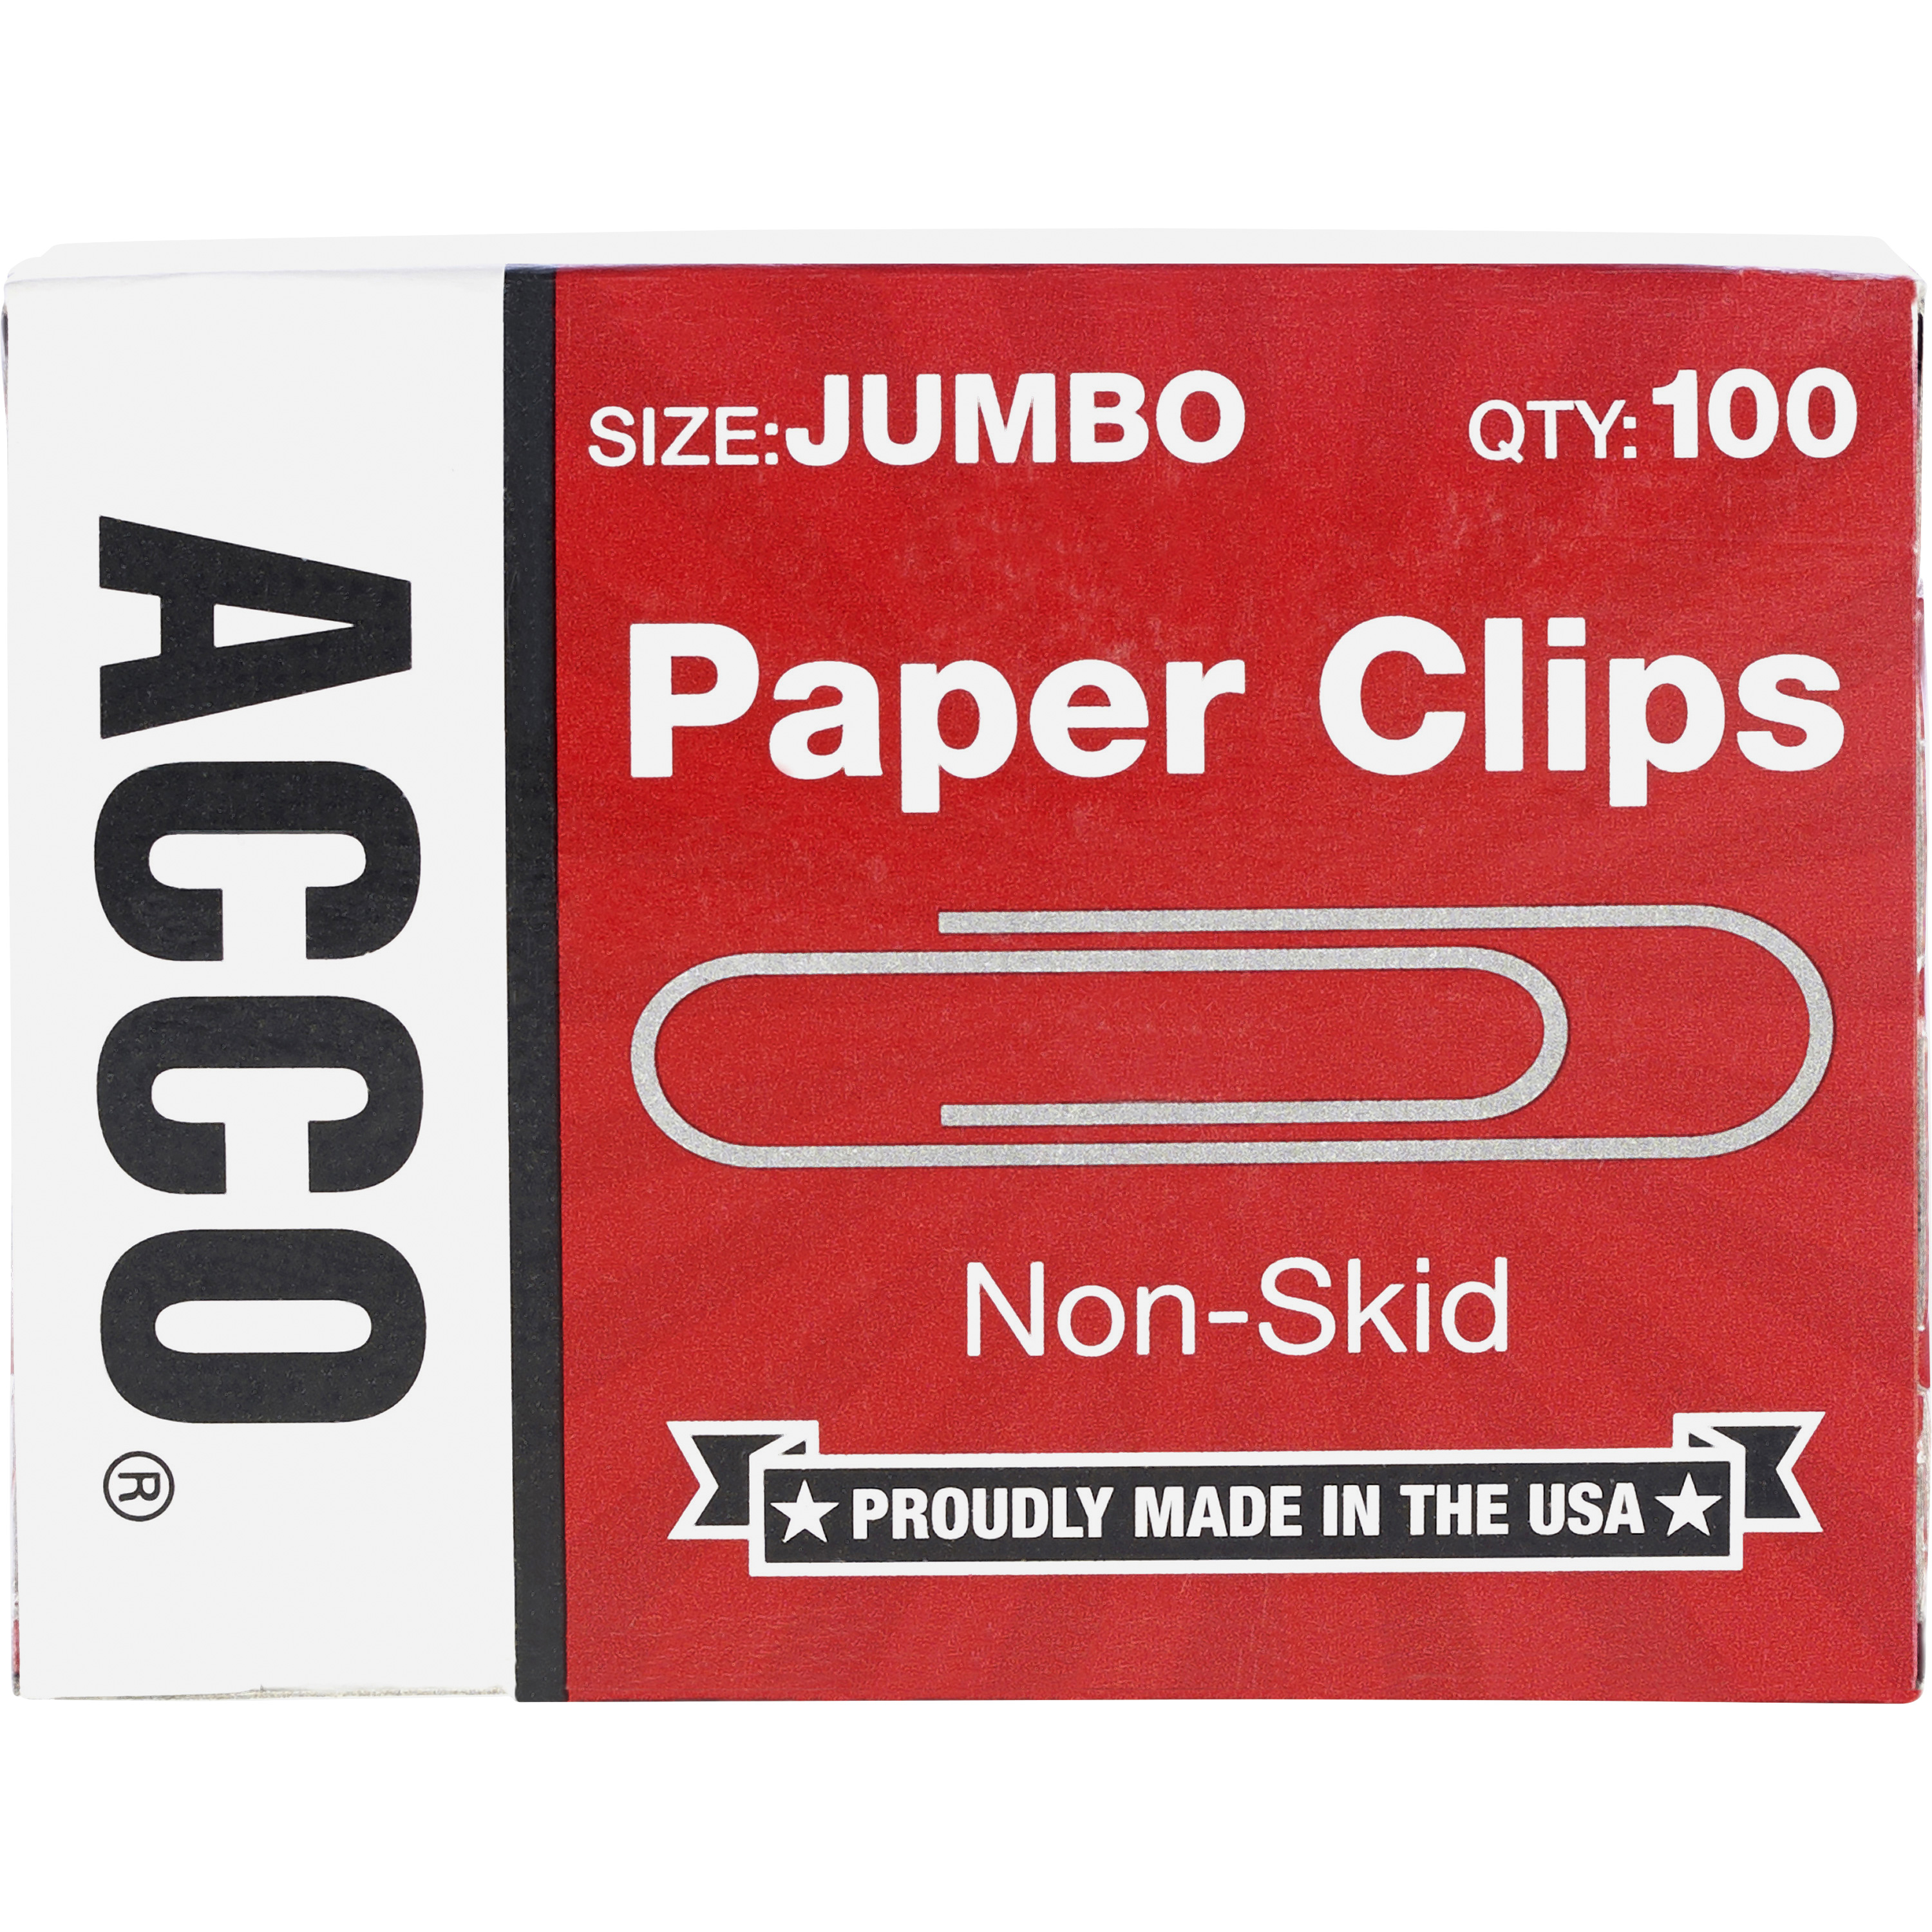 ACCO Nonskid Standard Paper Clips, Jumbo, Silver, 100/Box, 10 Boxes/Pack - image 2 of 3